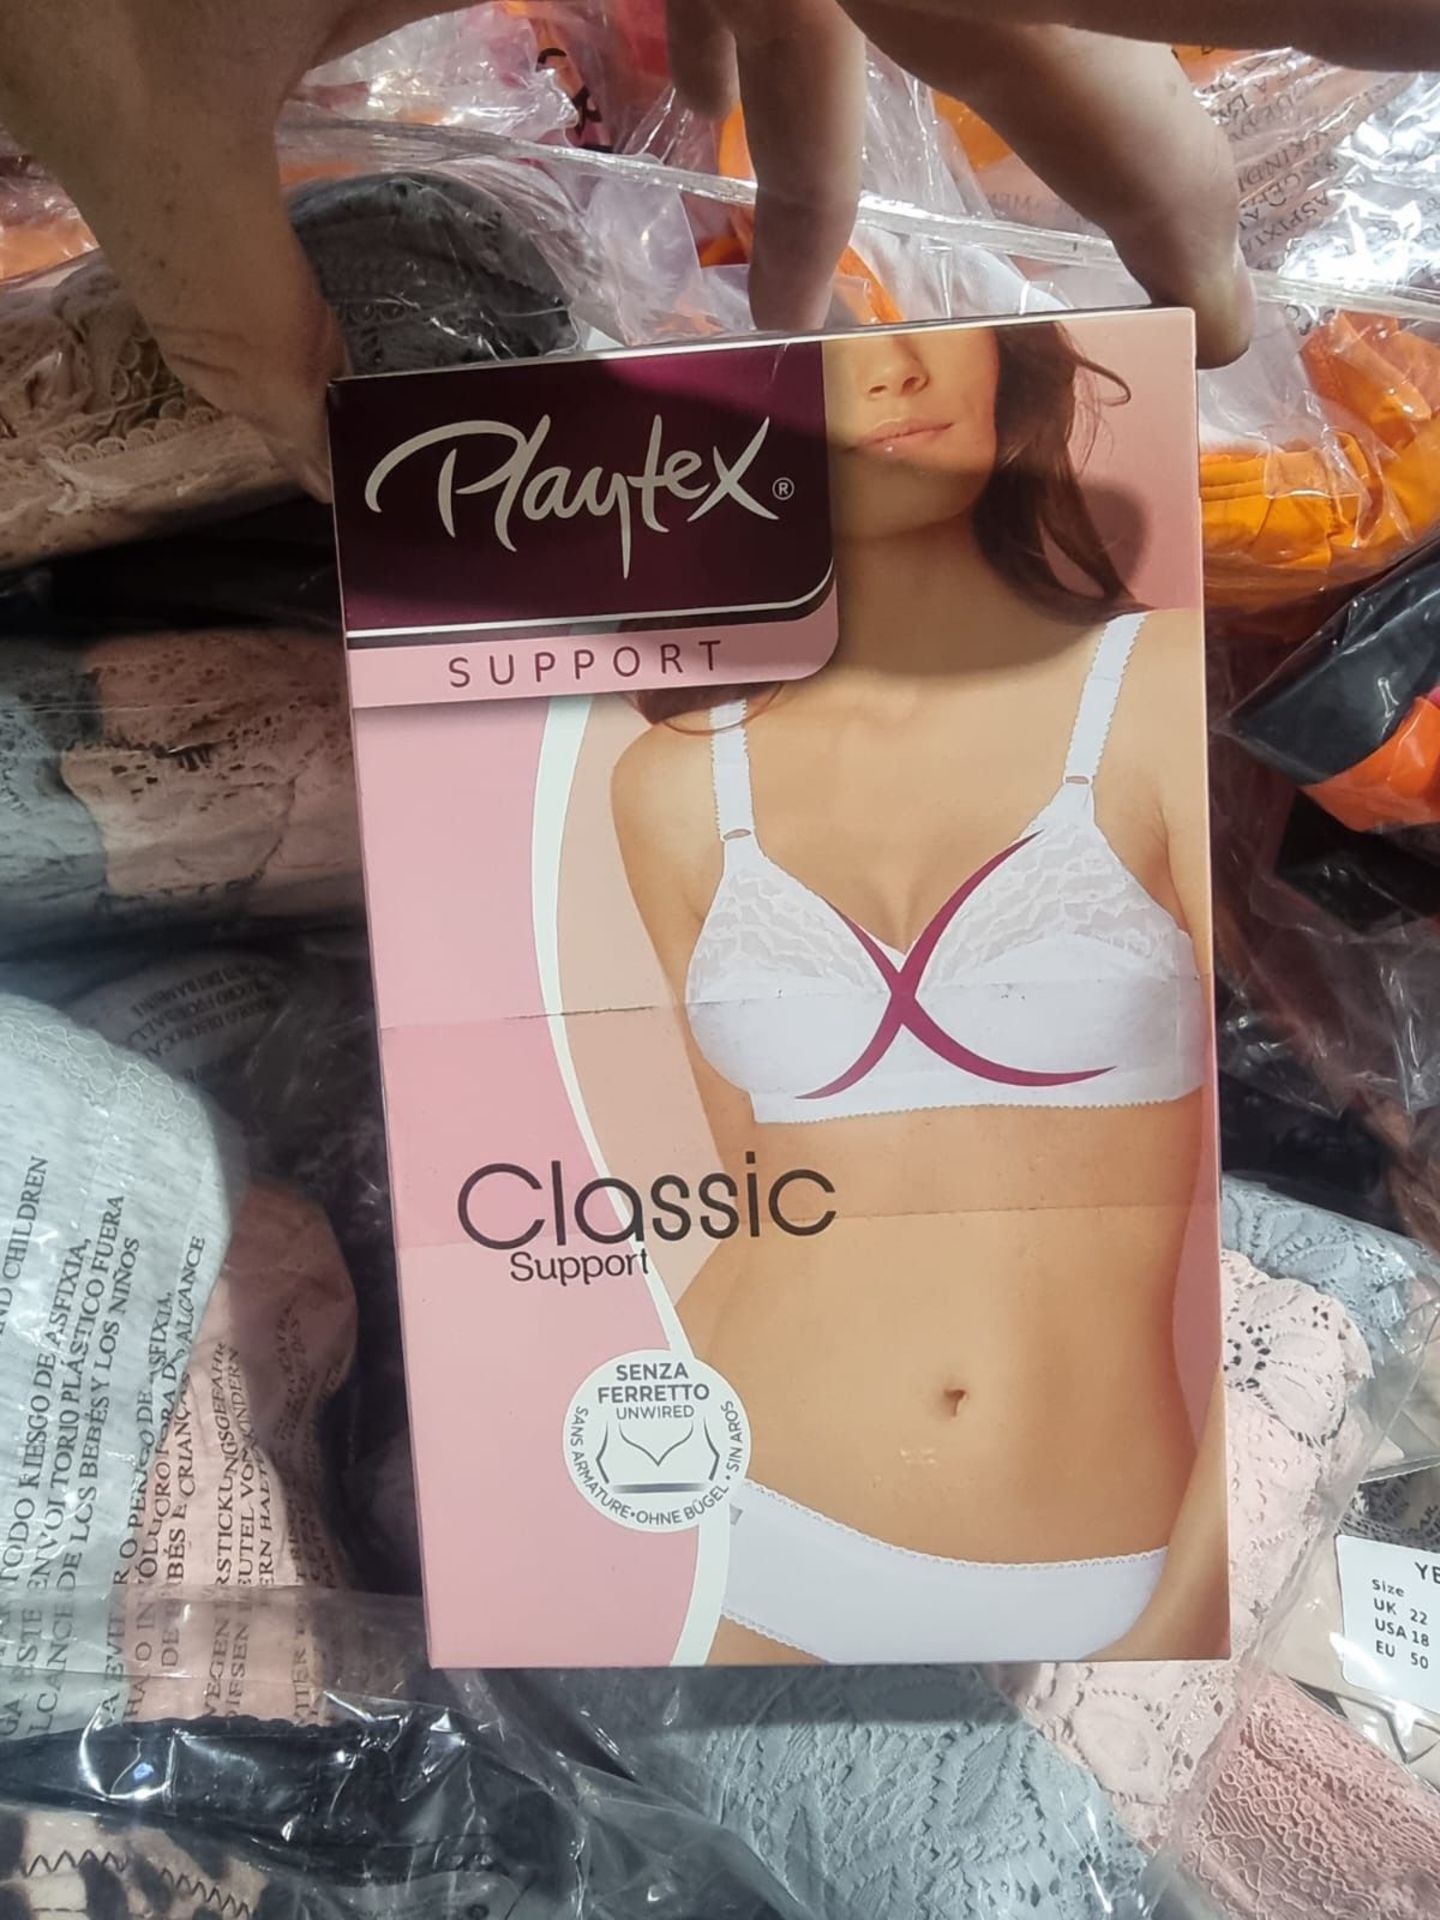 100 x NEW PACKAGED ASSORTED SWIM & UNDERWEAR FROM BRAND SUCH AS WONDERBRA, BOUX AVENUE, ANN SUMMERS, - Image 24 of 53